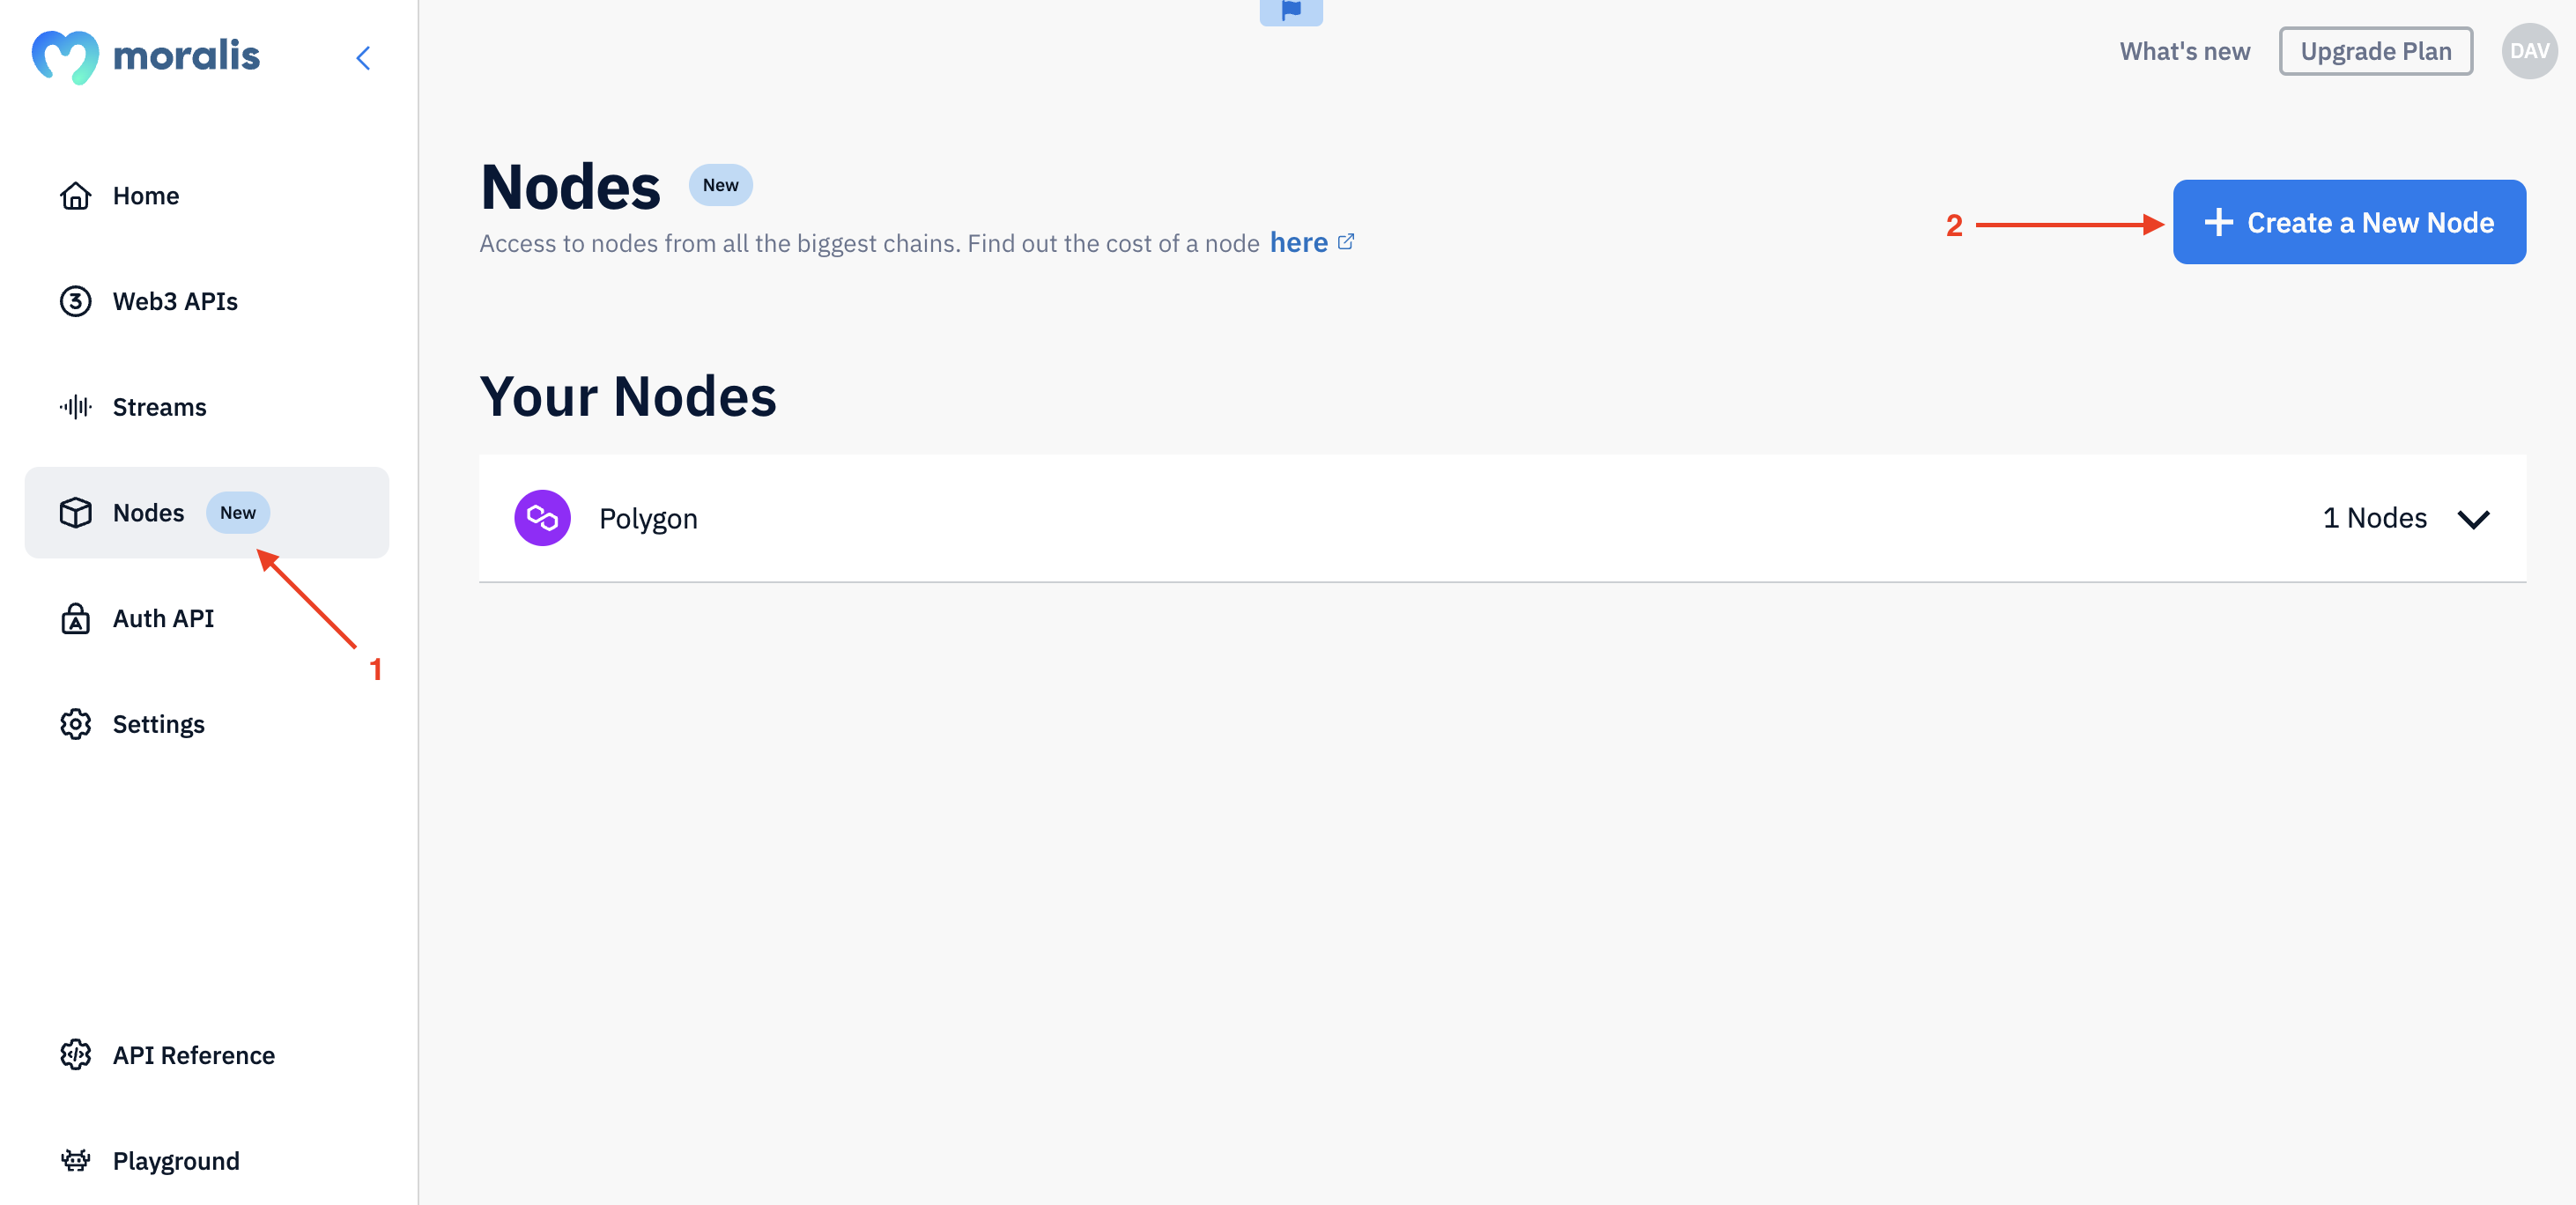 With an account at hand, head on over to the ”Nodes” tab and click on ”+ Create a New Node”: